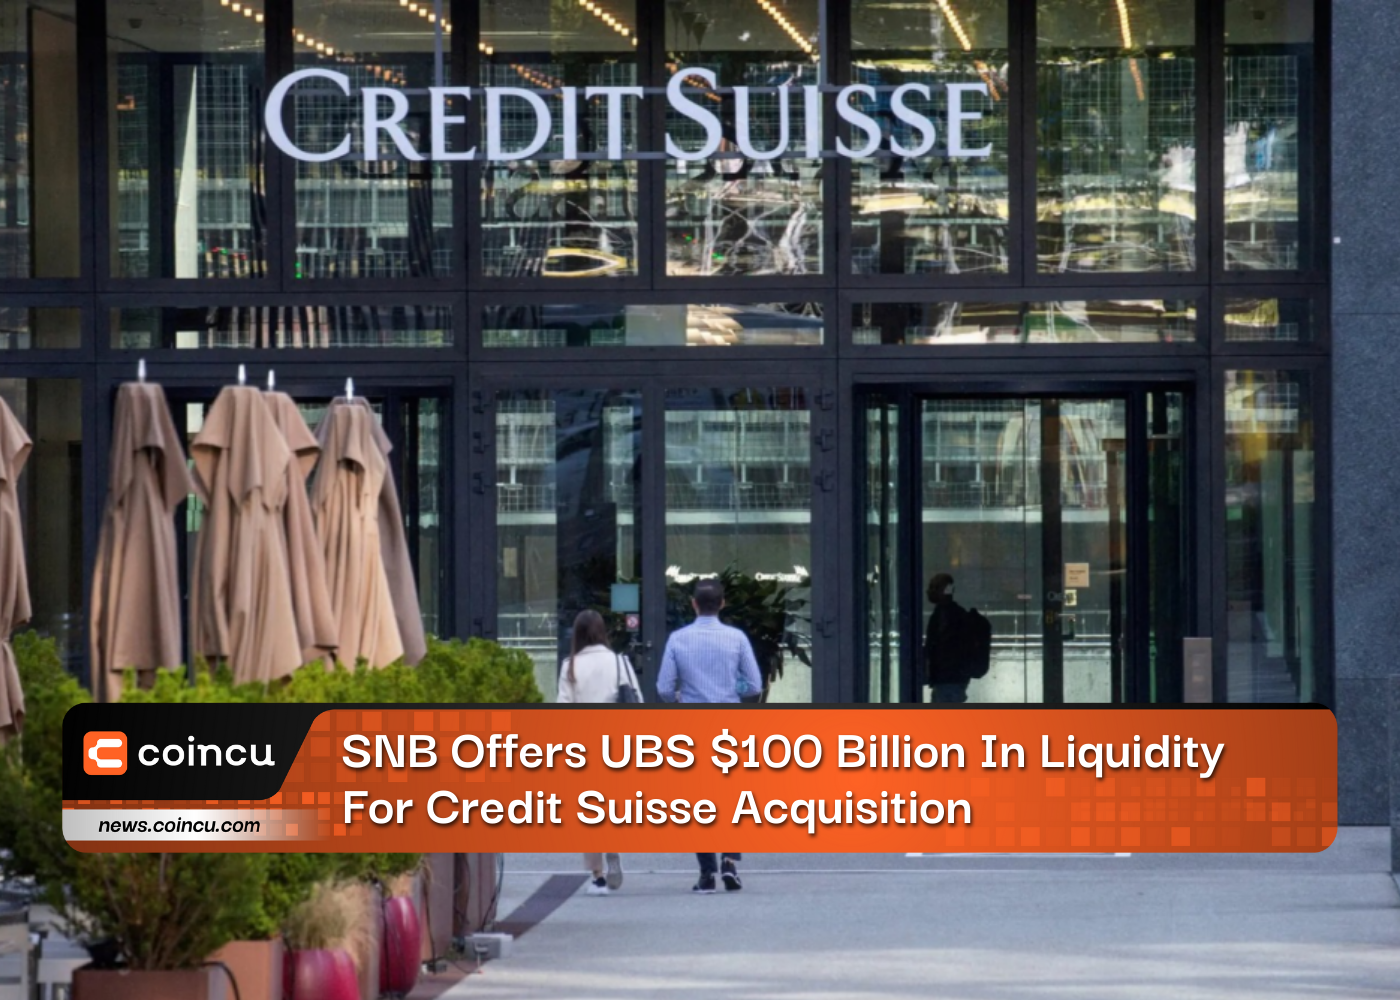 SNB Offers UBS $100 Billion In Liquidity For Credit Suisse Acquisition